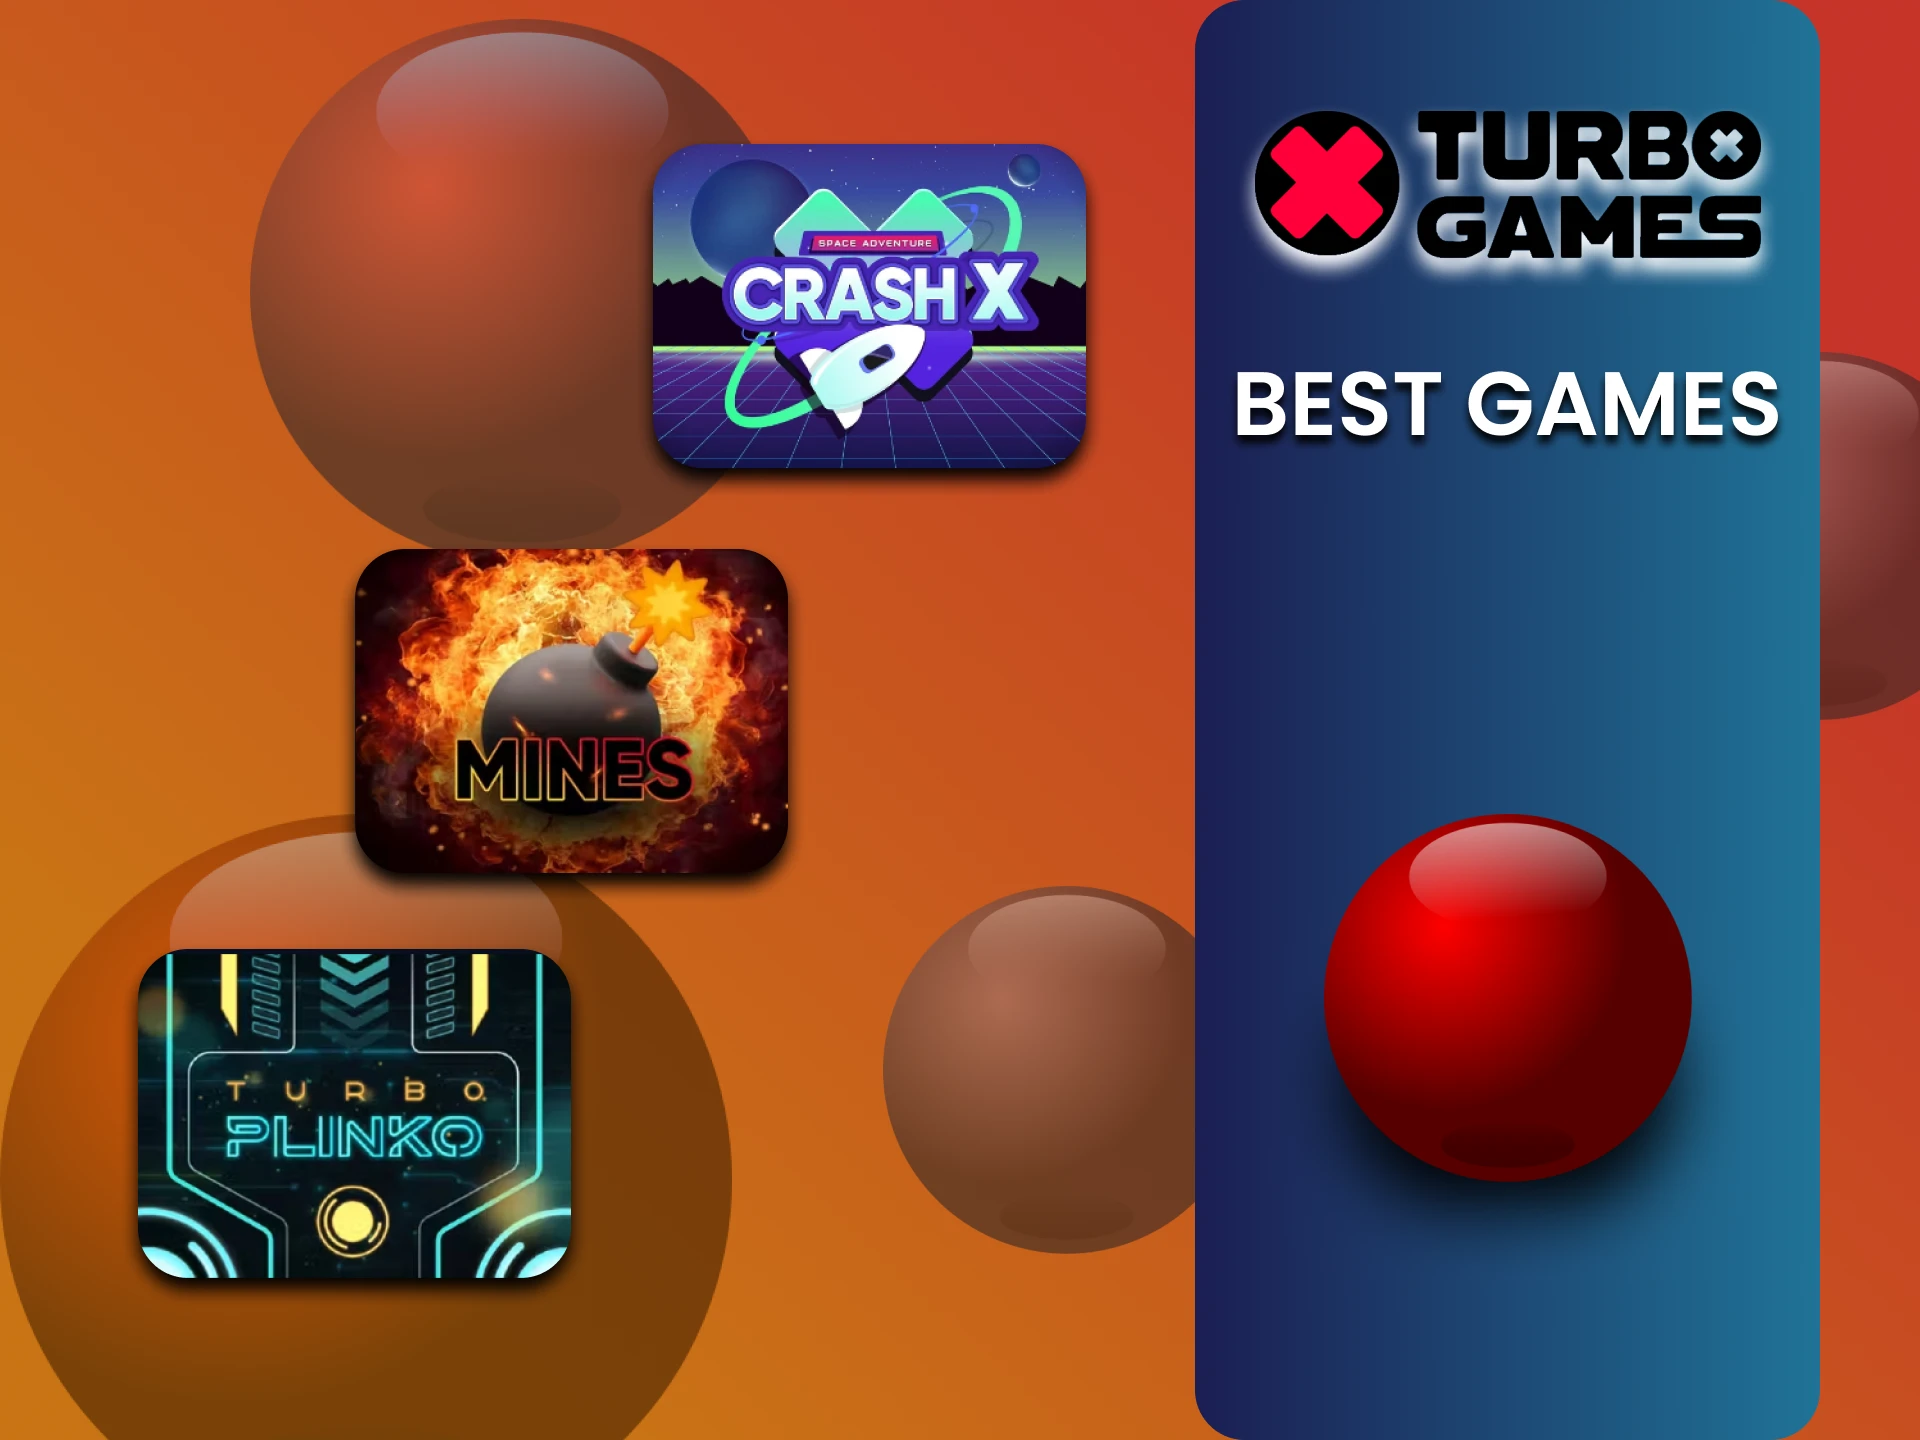 Choose to play one of the best games from Turbo Games .